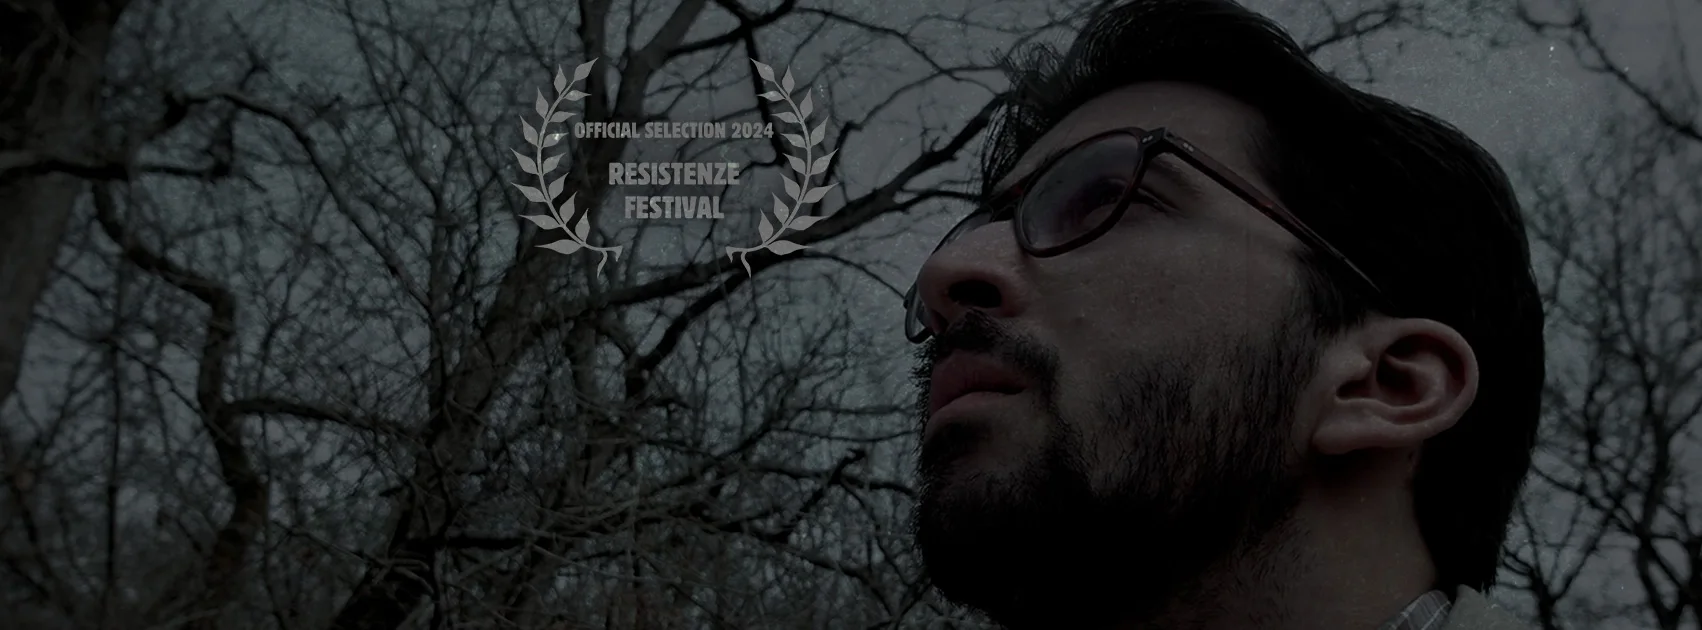 The short film "The recurrence" is in the official selection of Resistenze Festival.